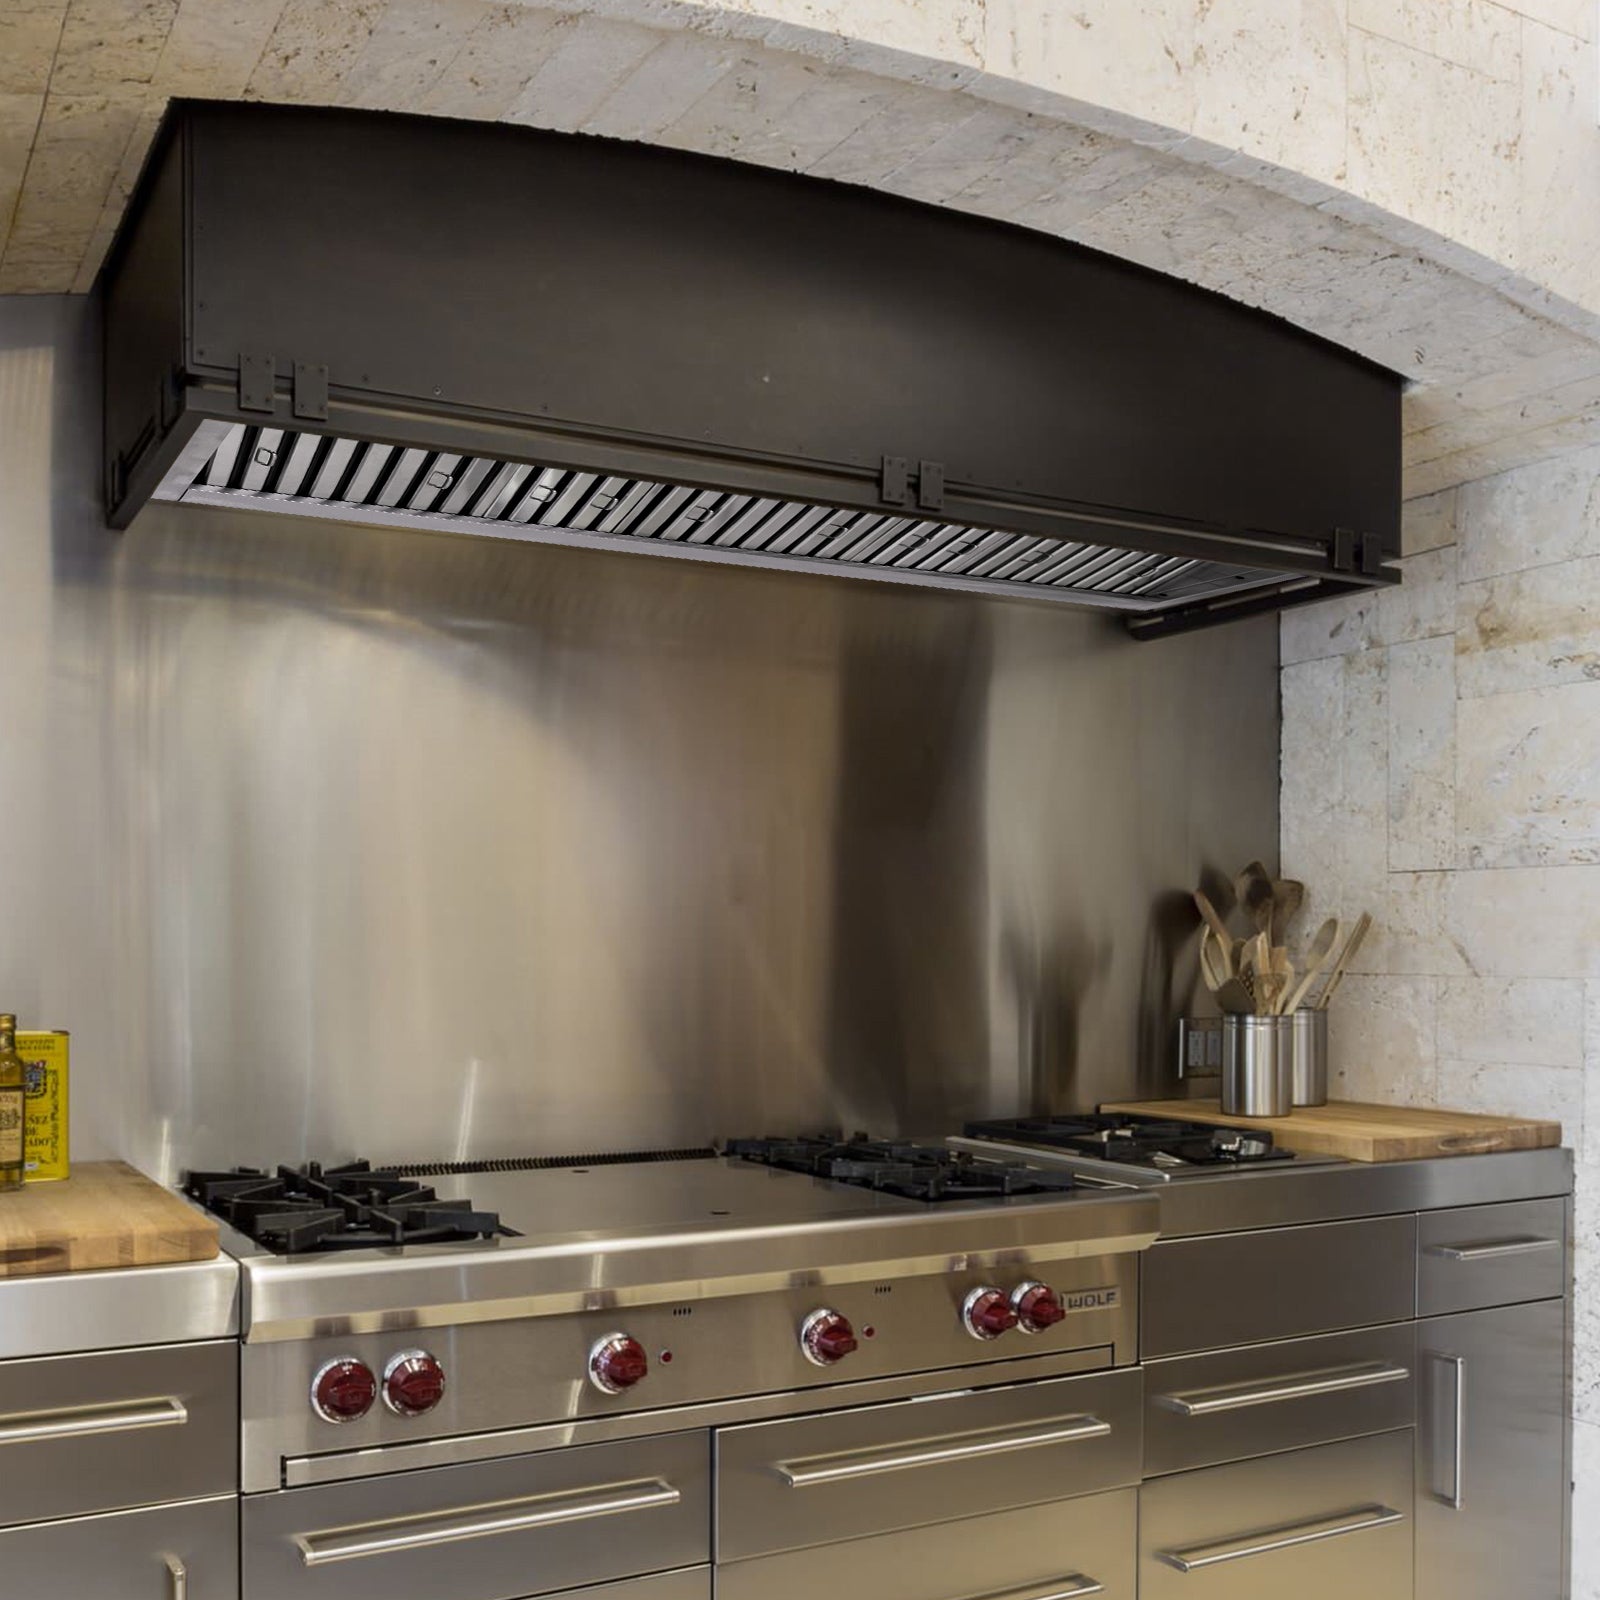 Selecting a Kitchen Ventilation System or Hood